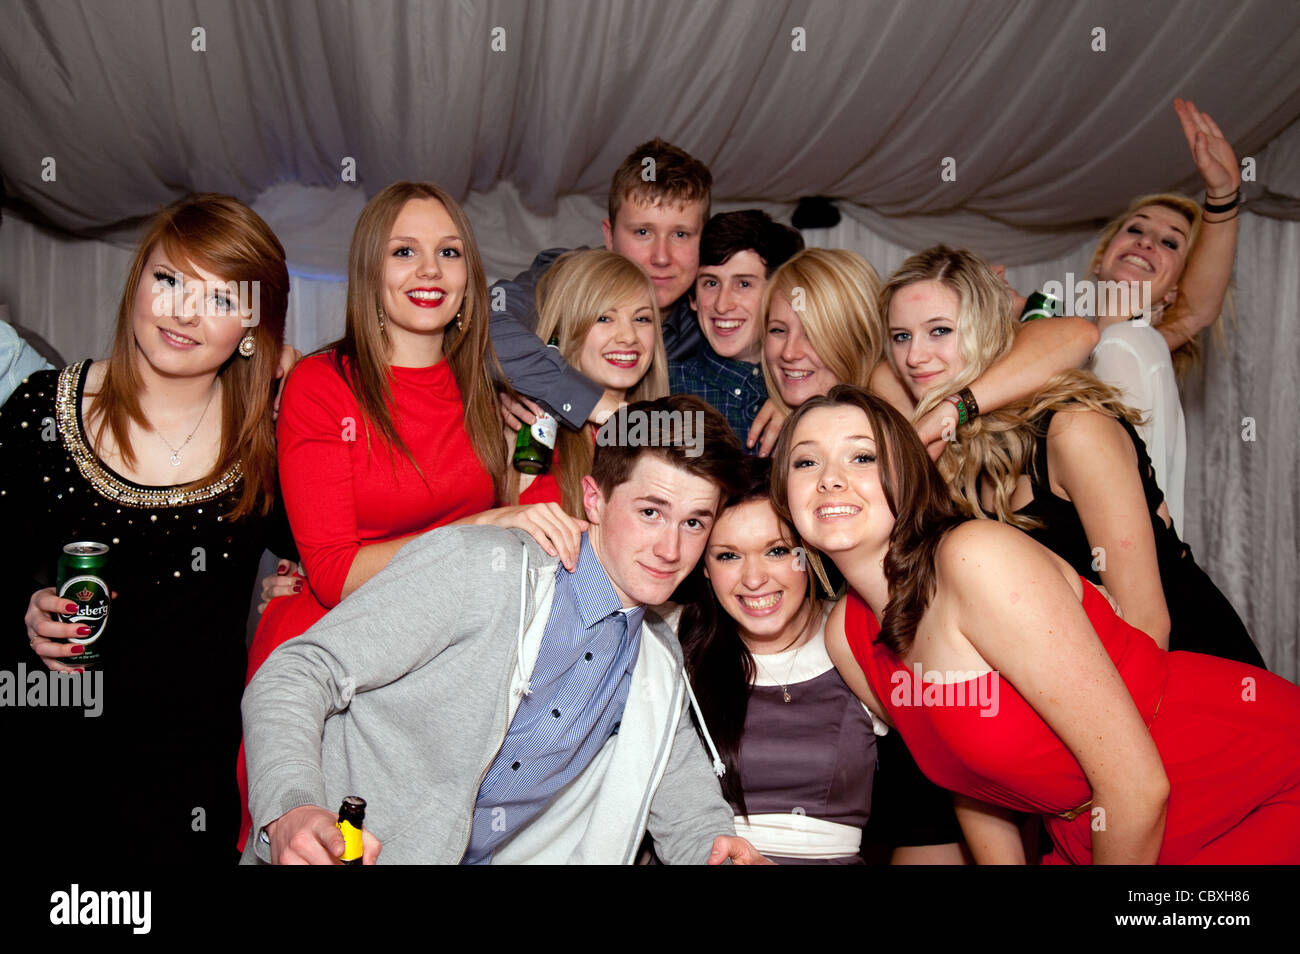 A large group of teenagers enjoying themselves at a teen party, UK Stock Photo